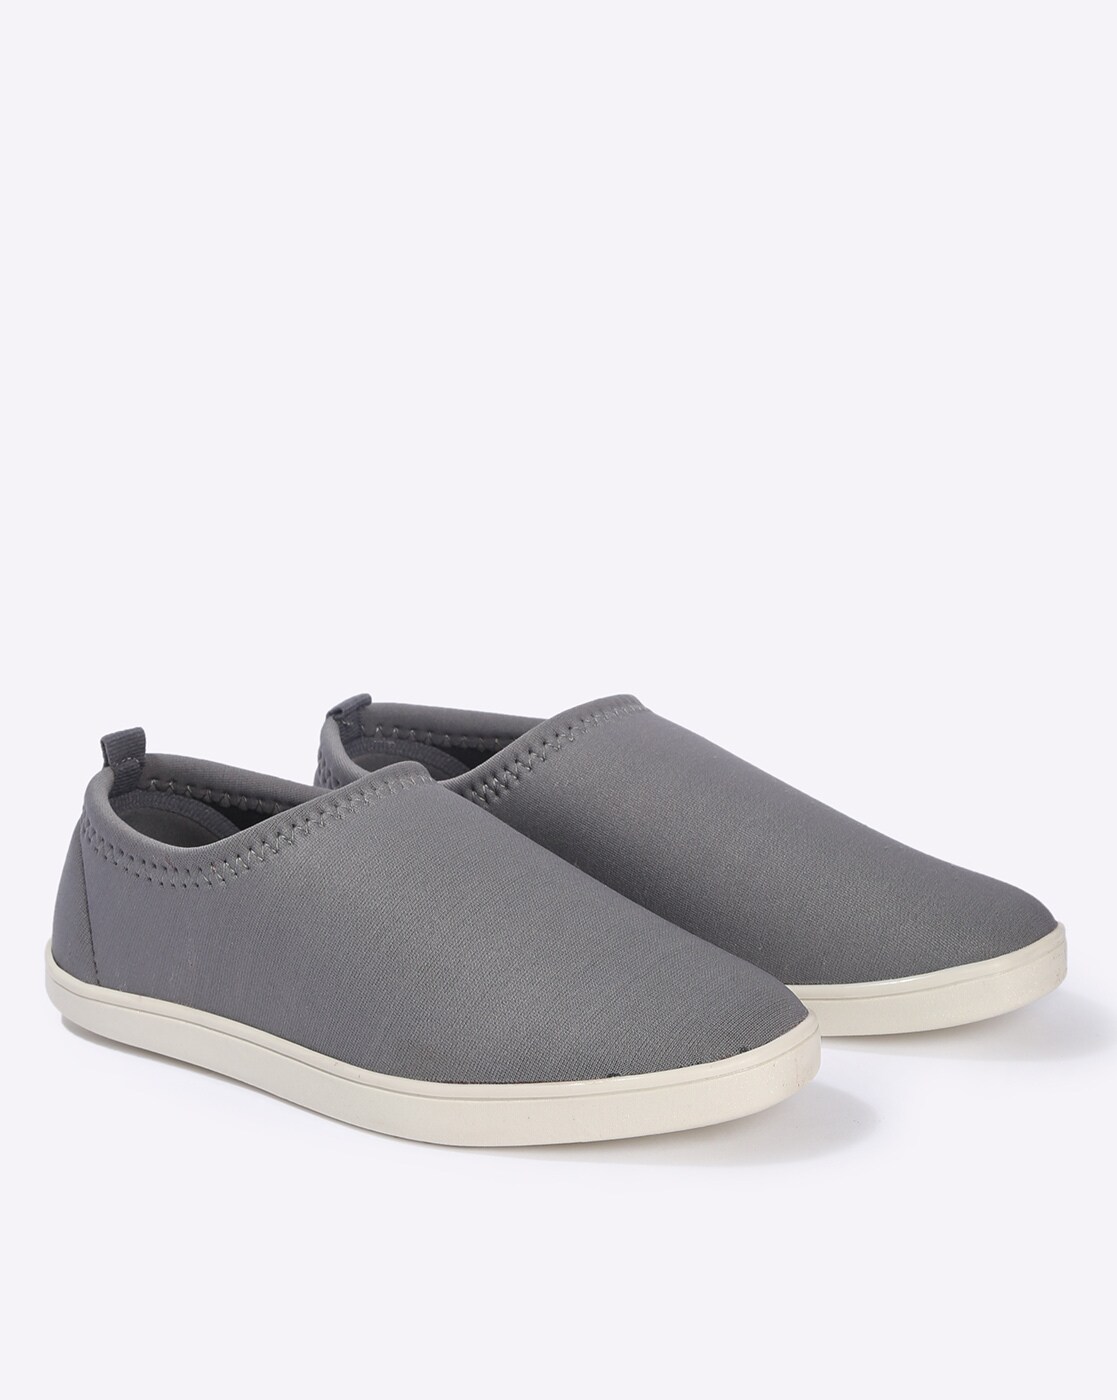 koovs - #TuesdayShoesday Grab this cool and stylish slip-on gusset plimsoll  shoes only from Koovs. 👟😍 (Add this to your cart 🔎  https://bit.ly/3bopCzd) . . #StayHomeStaySafe #StayHomeWithKoovs  #StayHomeStayFit #koovsman #koovsfashion #koovs ...